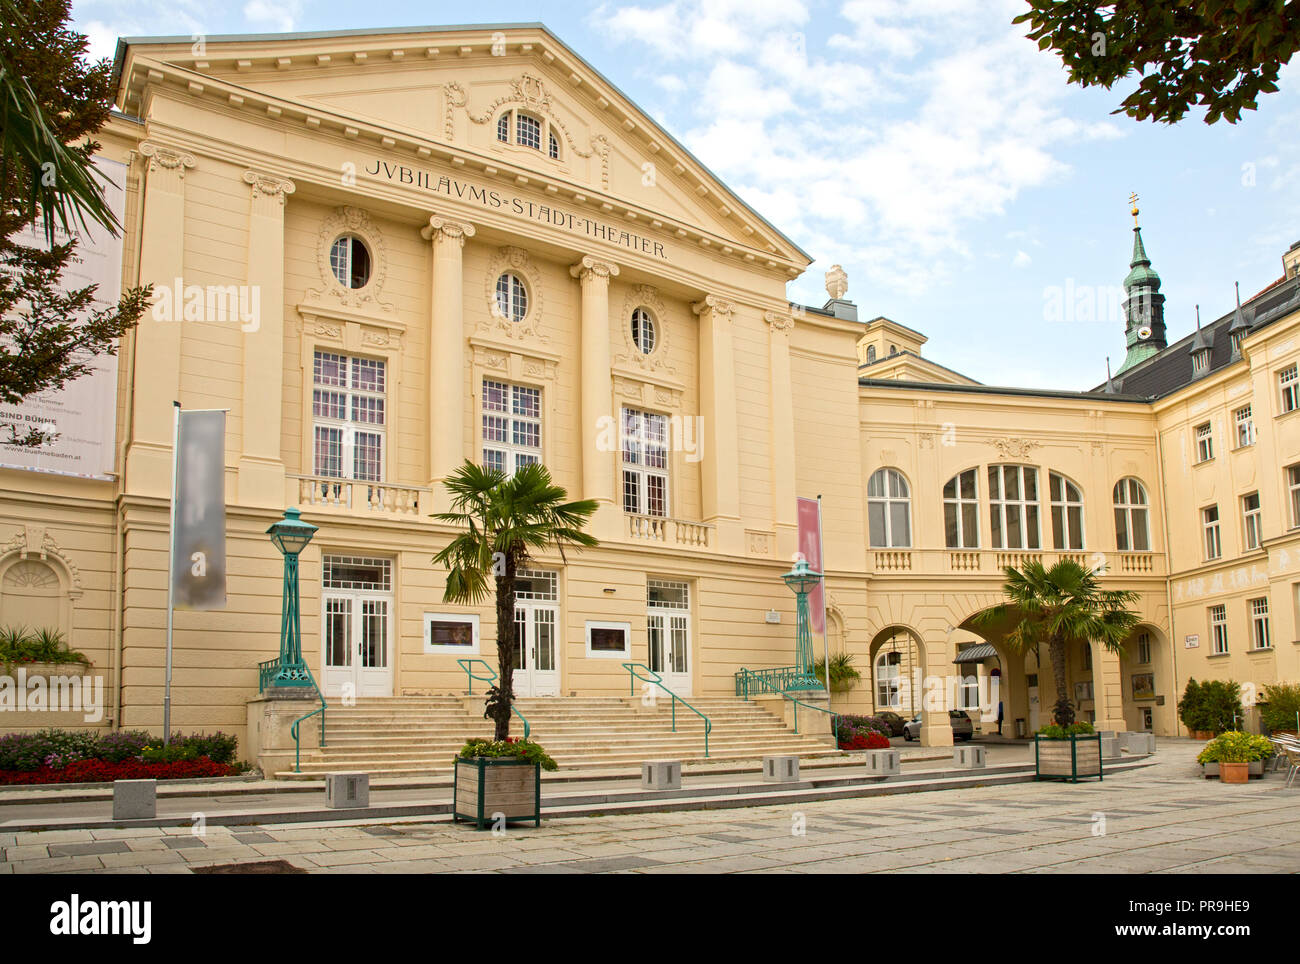 Page 3 - Baden Bei Wien High Resolution Stock Photography and Images - Alamy